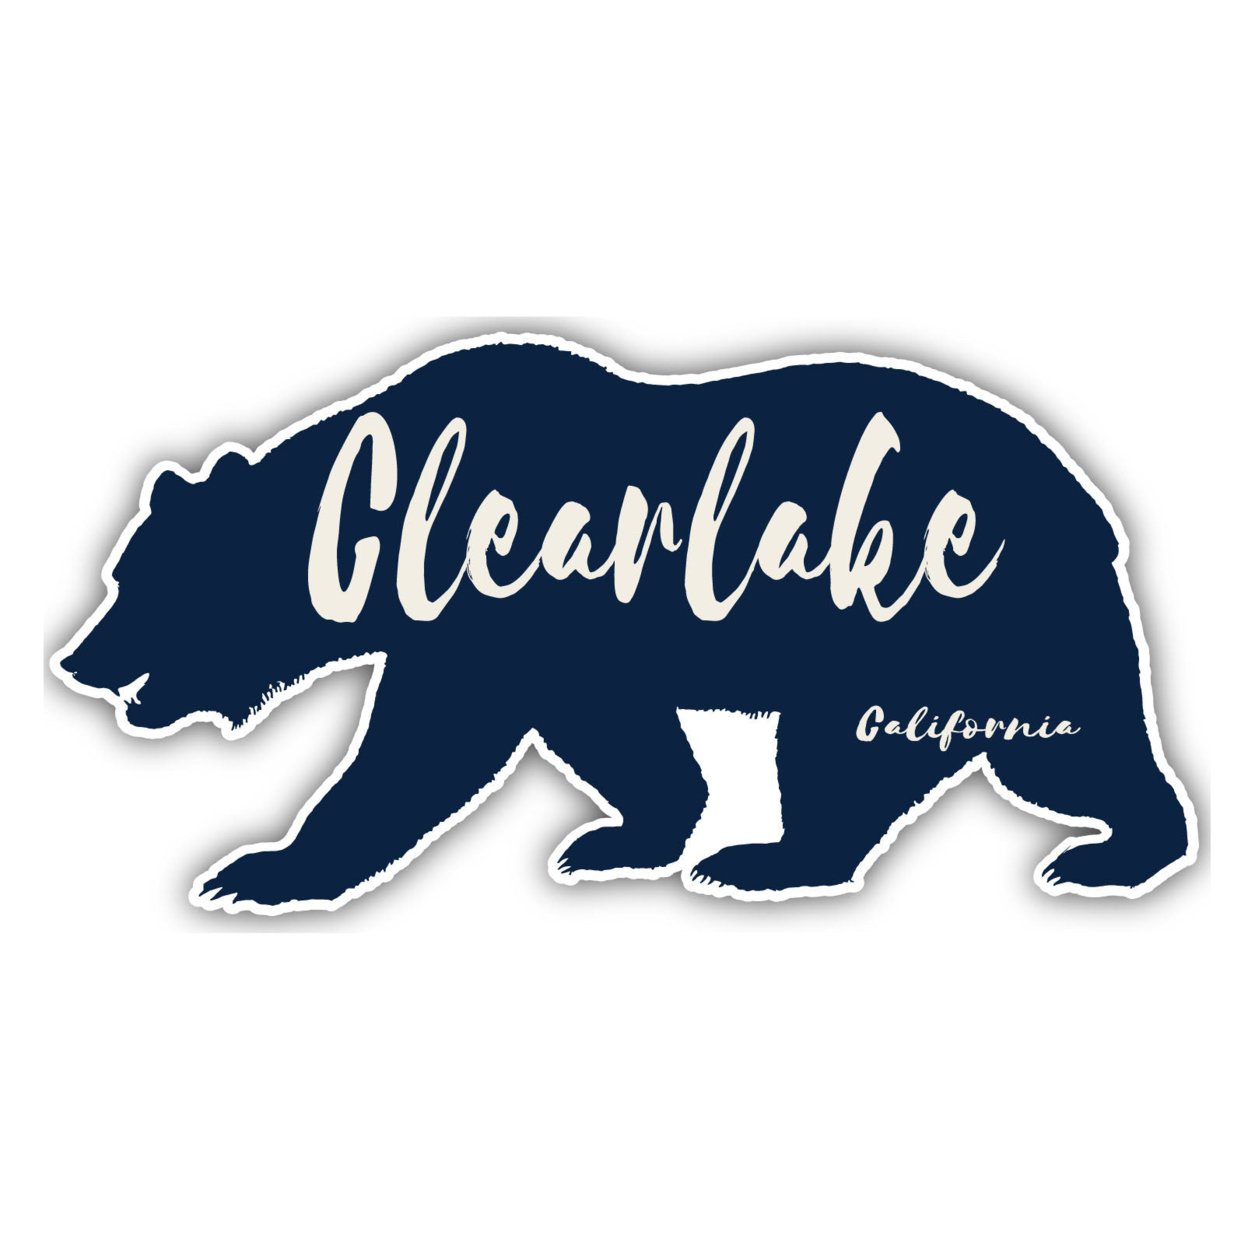 Clearlake California Souvenir Decorative Stickers (Choose Theme And Size) - 4-Pack, 8-Inch, Camp Life